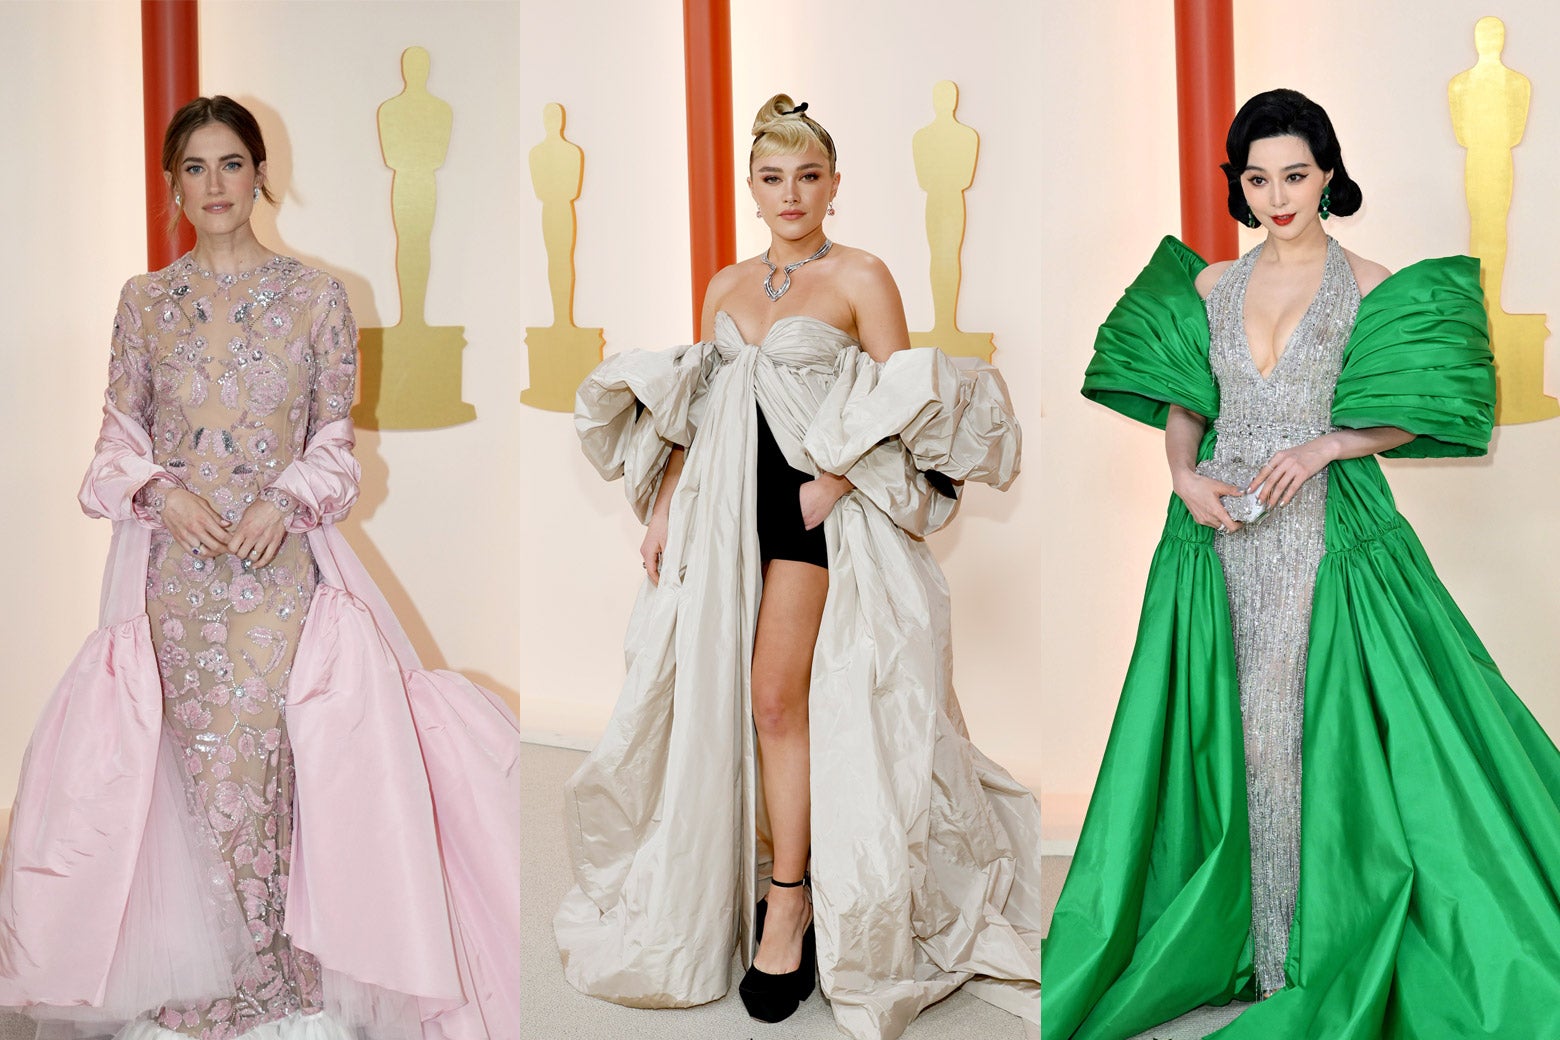 Allison Williams, Florence Pugh, and Fan Bingbing at the 2023 Oscars.